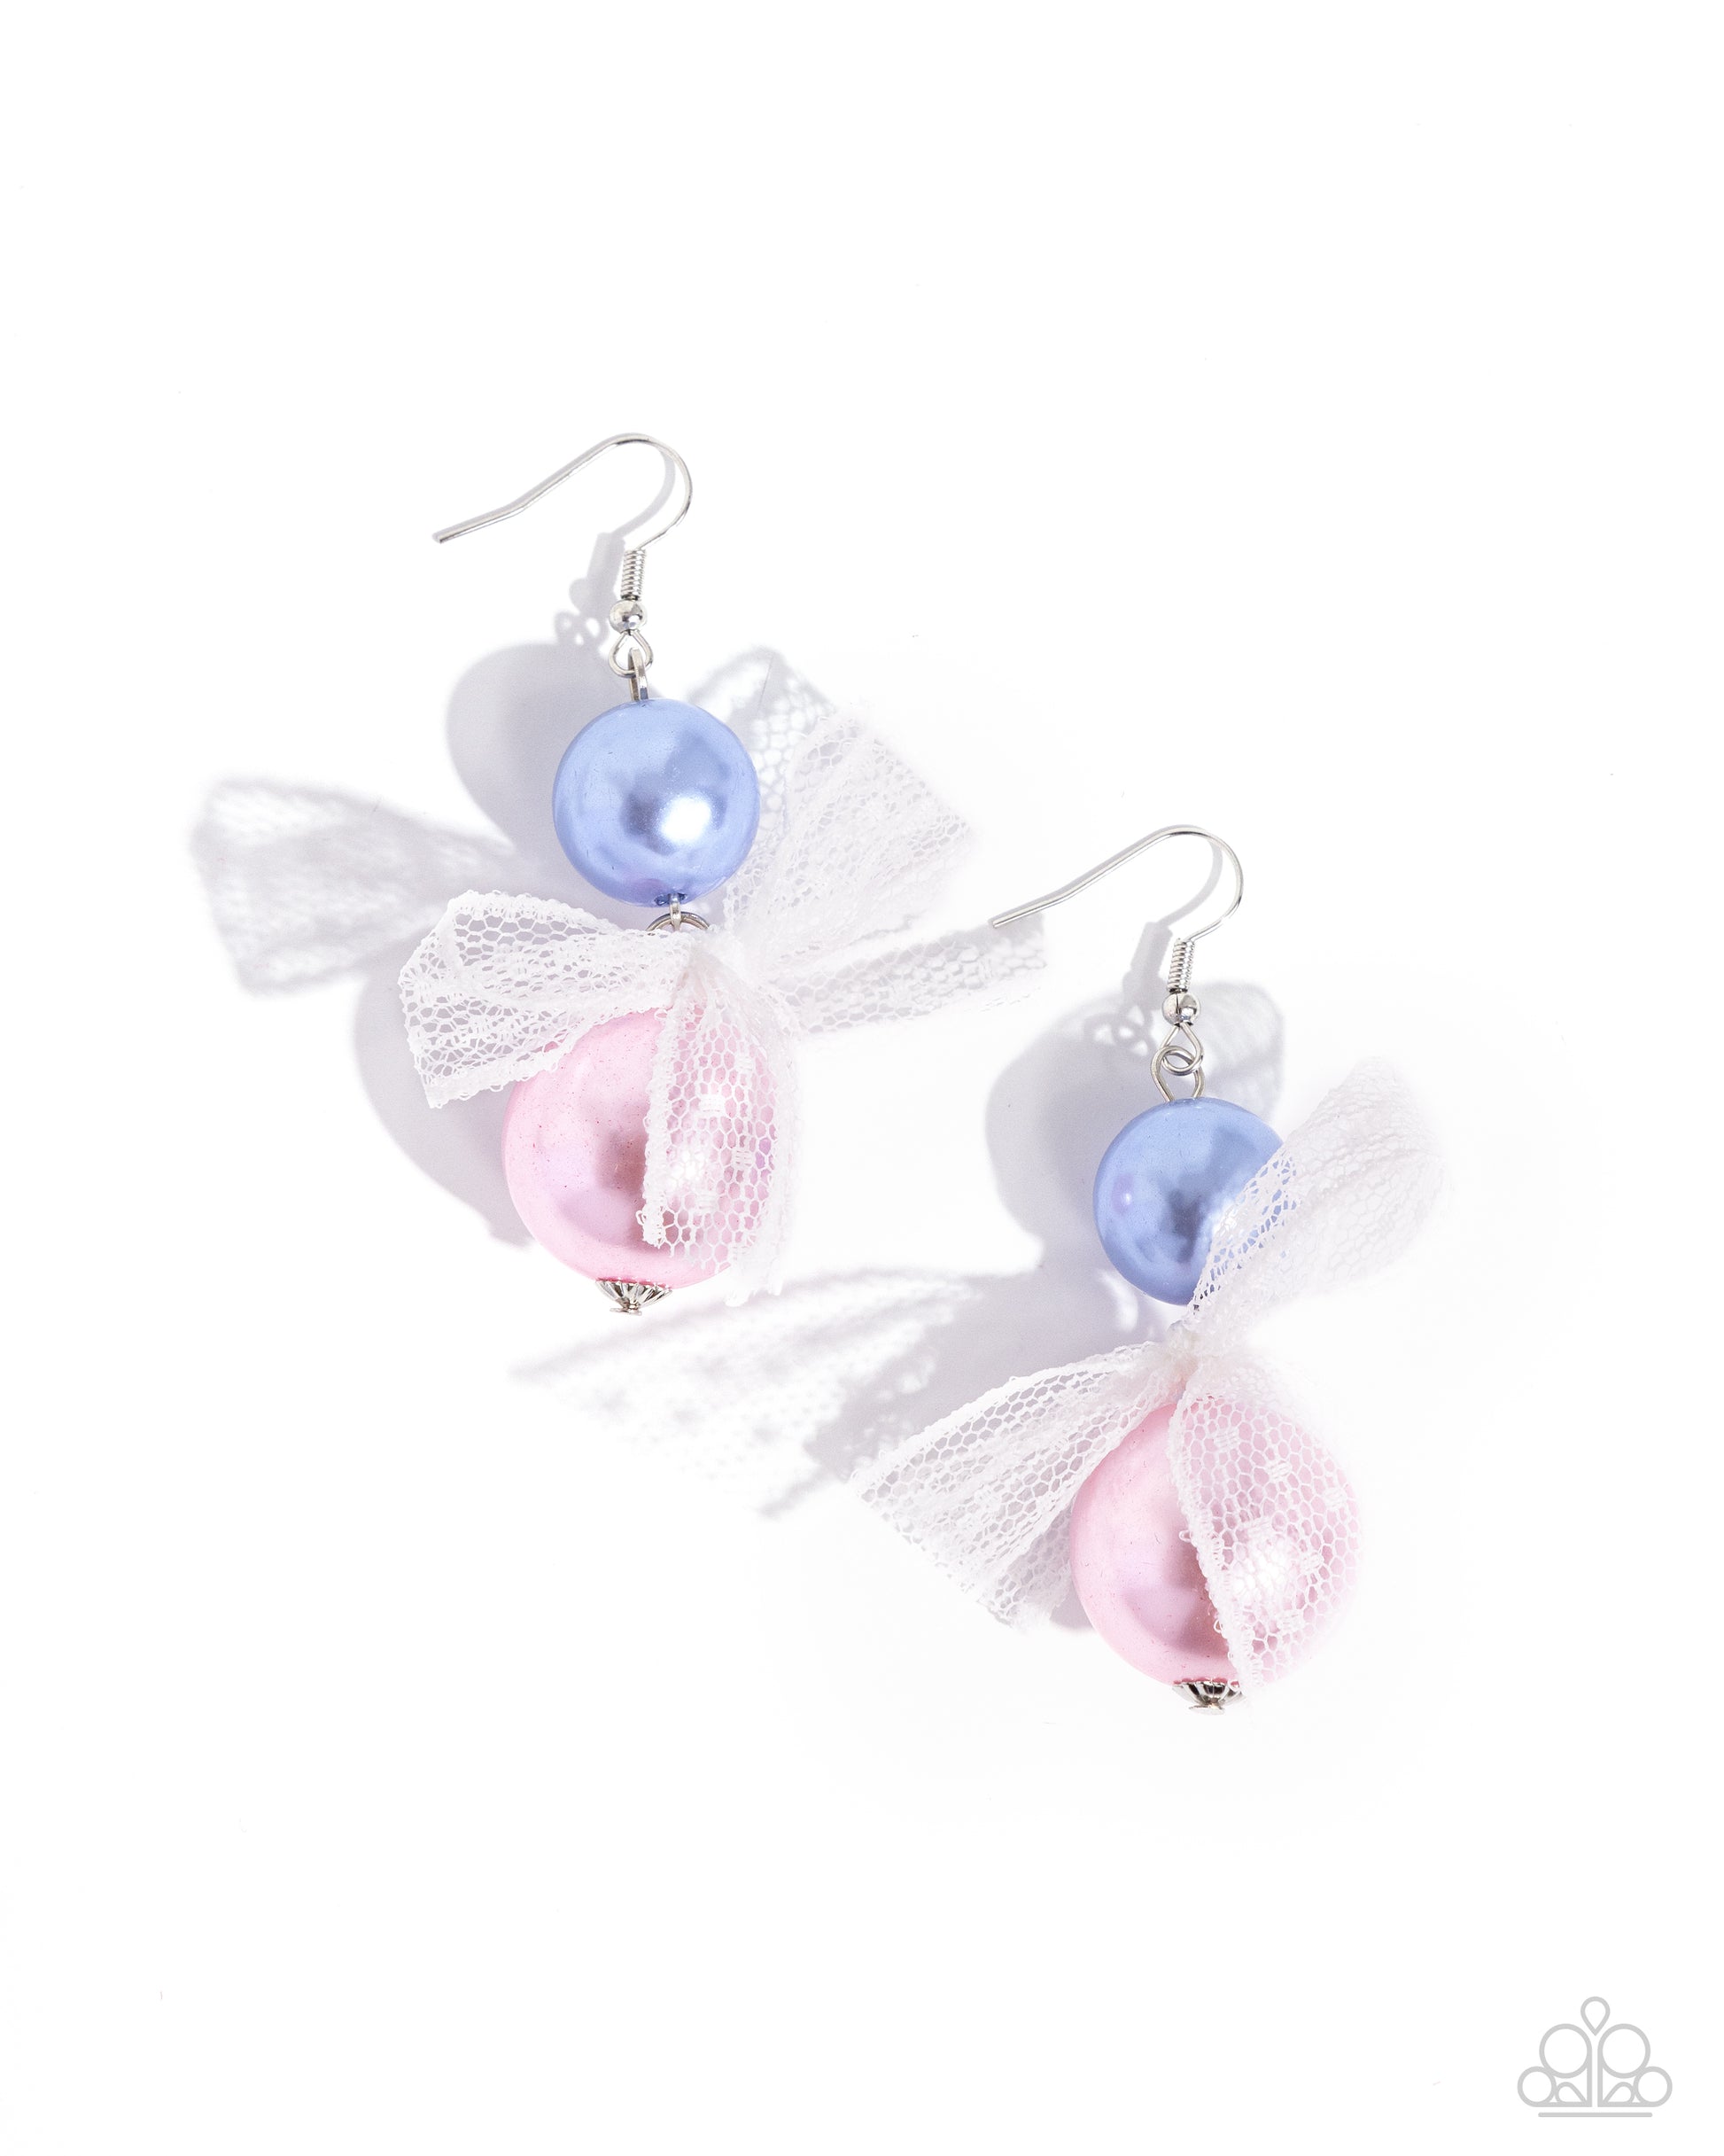 <p>Two glossy pearls one in blue and one in pink stack atop one another while an airy, chiffon white ribbon is tied in the center of the pearls for a refined finish. Earring attaches to a standard fishhook fitting.</p> <p><i> Sold as one pair of earrings. </i></p> <br><b> Get The Complete Look! </b> <br>Bracelet: "Girly Glam - Multi" (Sold Separately)